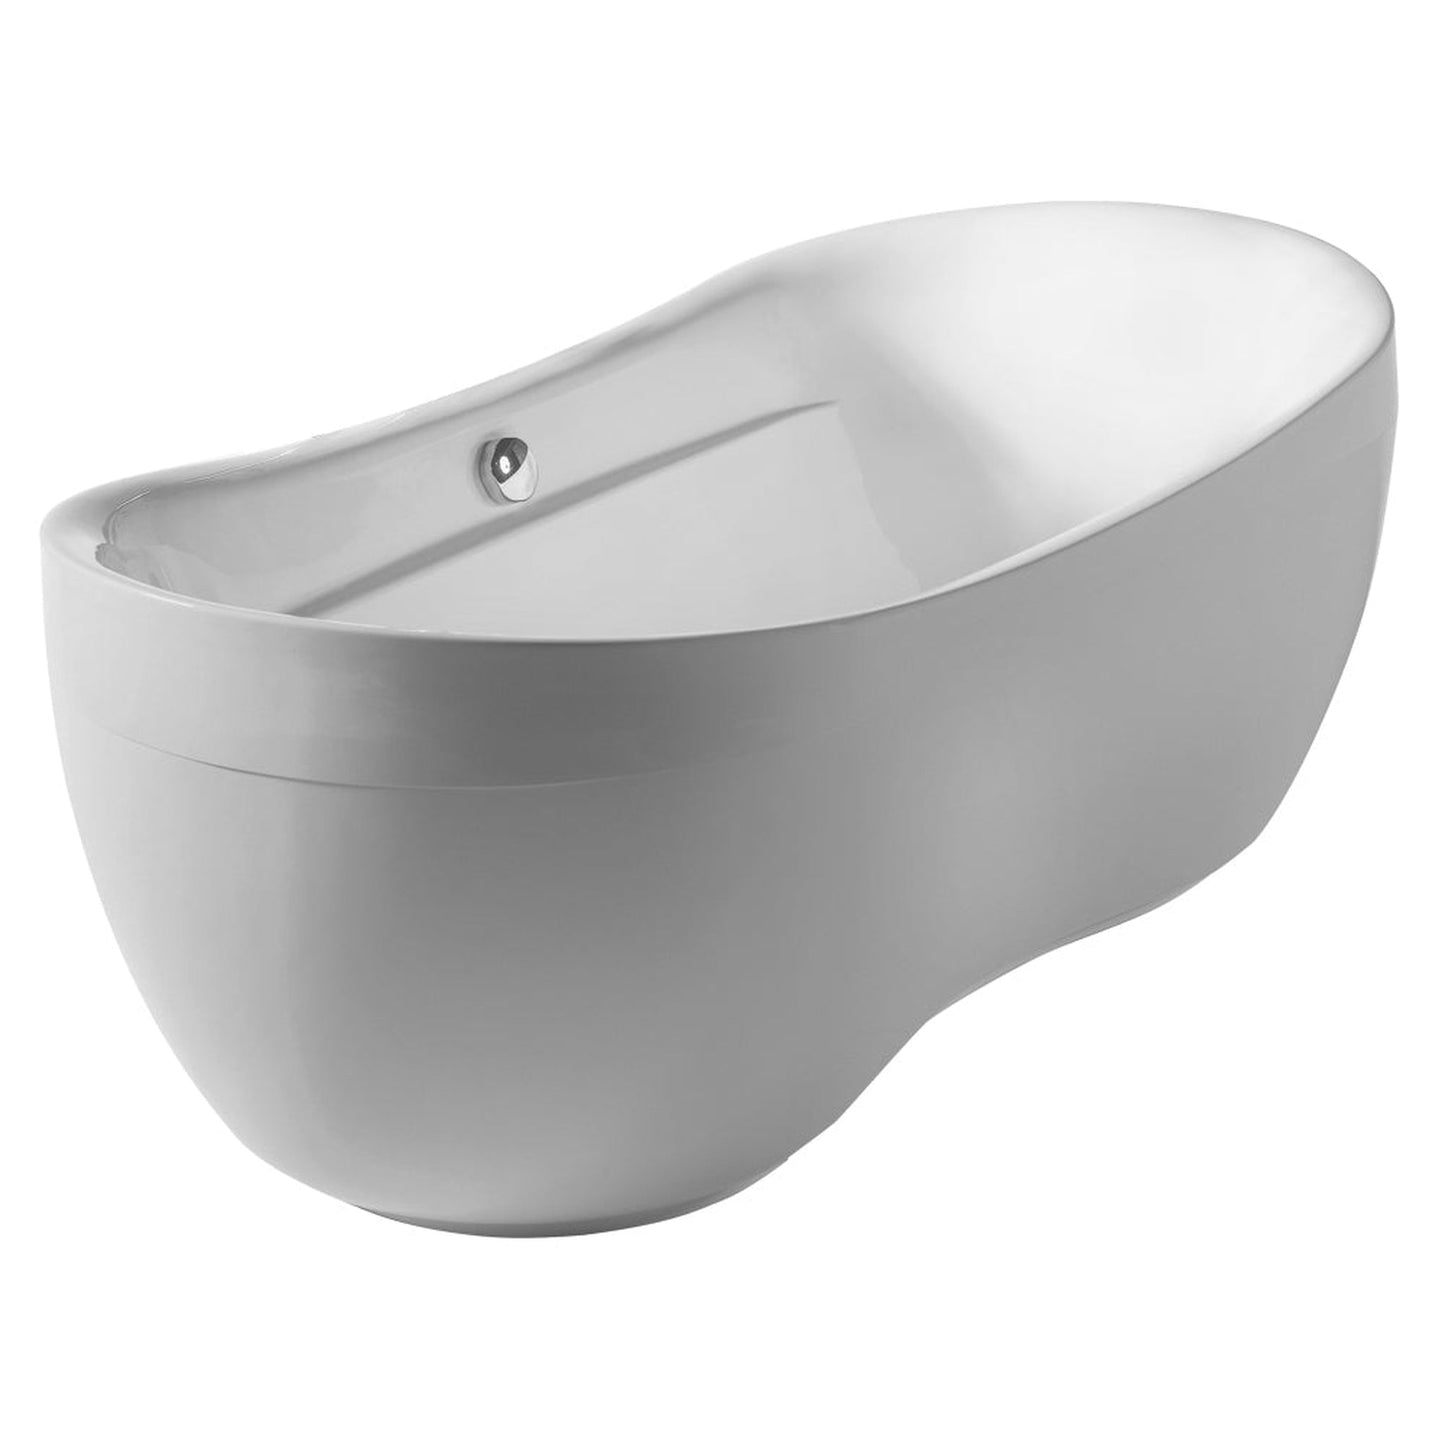 Whitehaus Bathhaus WHYB170BATH Oval Double Ended Lucite Acrylic Freestanding Bathtub With Curved Rim